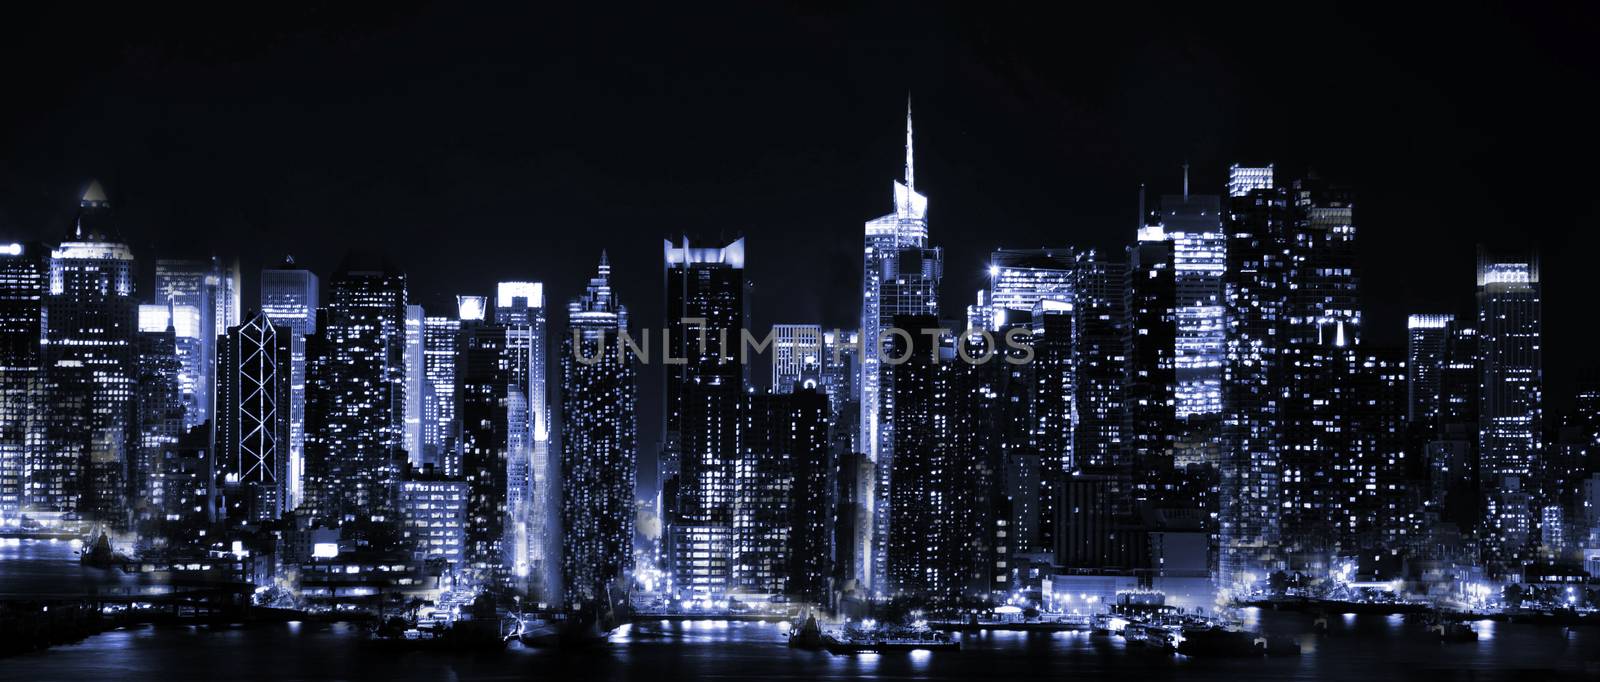 View of a huge night city from afar on a black background.Texture or background